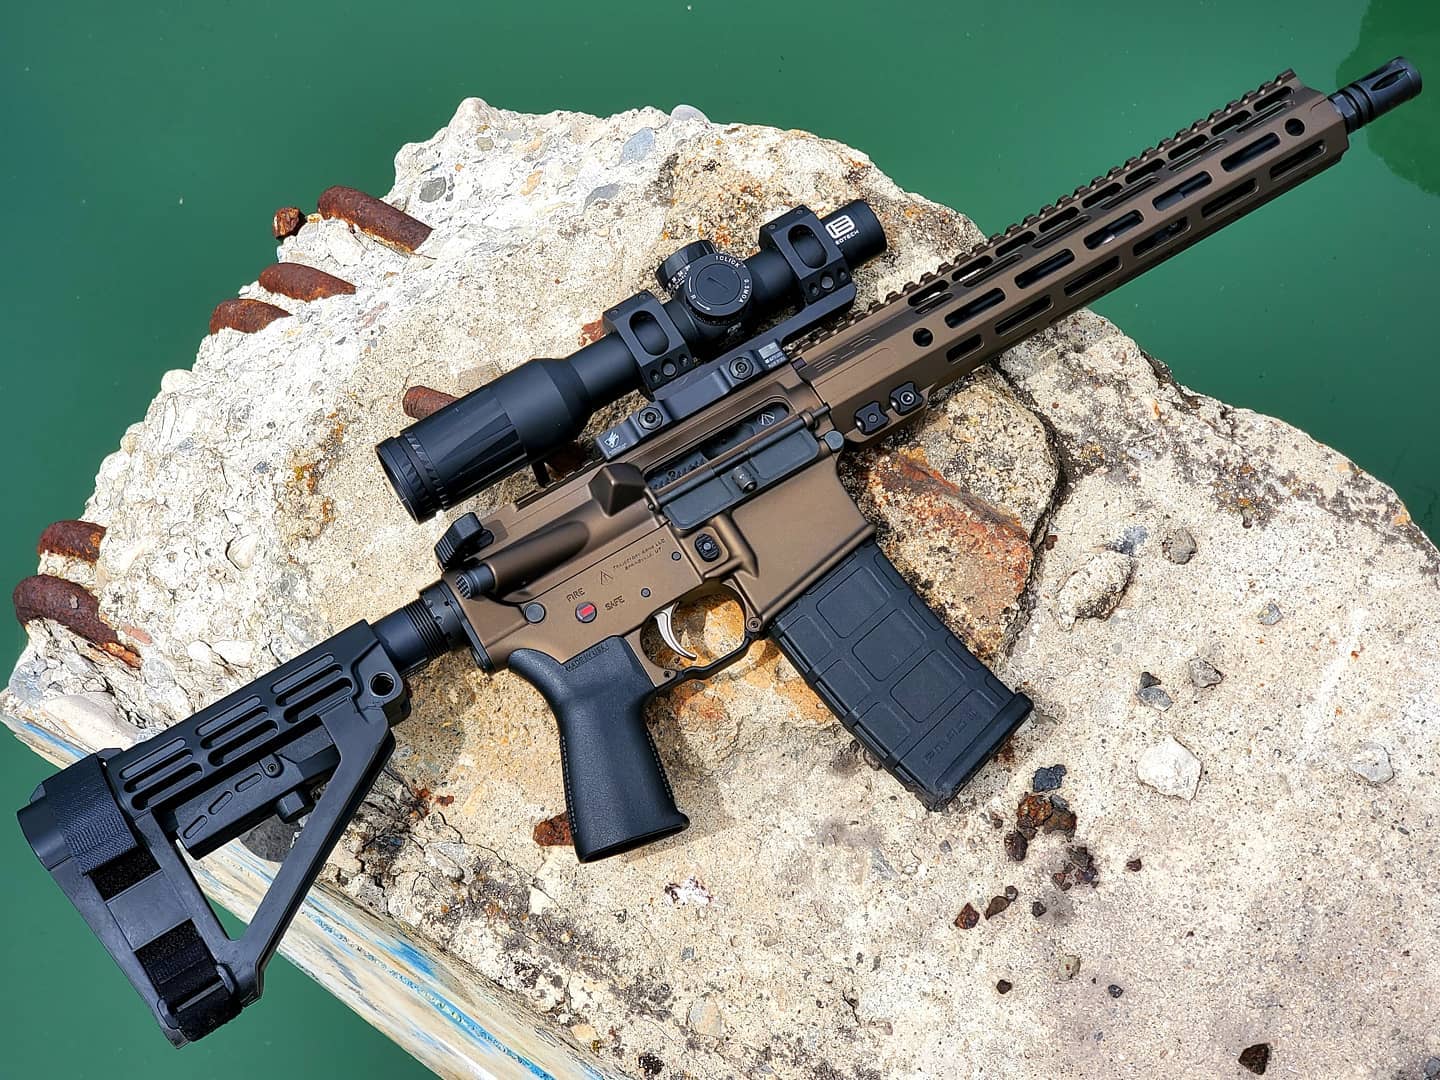 Why AR-15 Is Bad For Home Defense